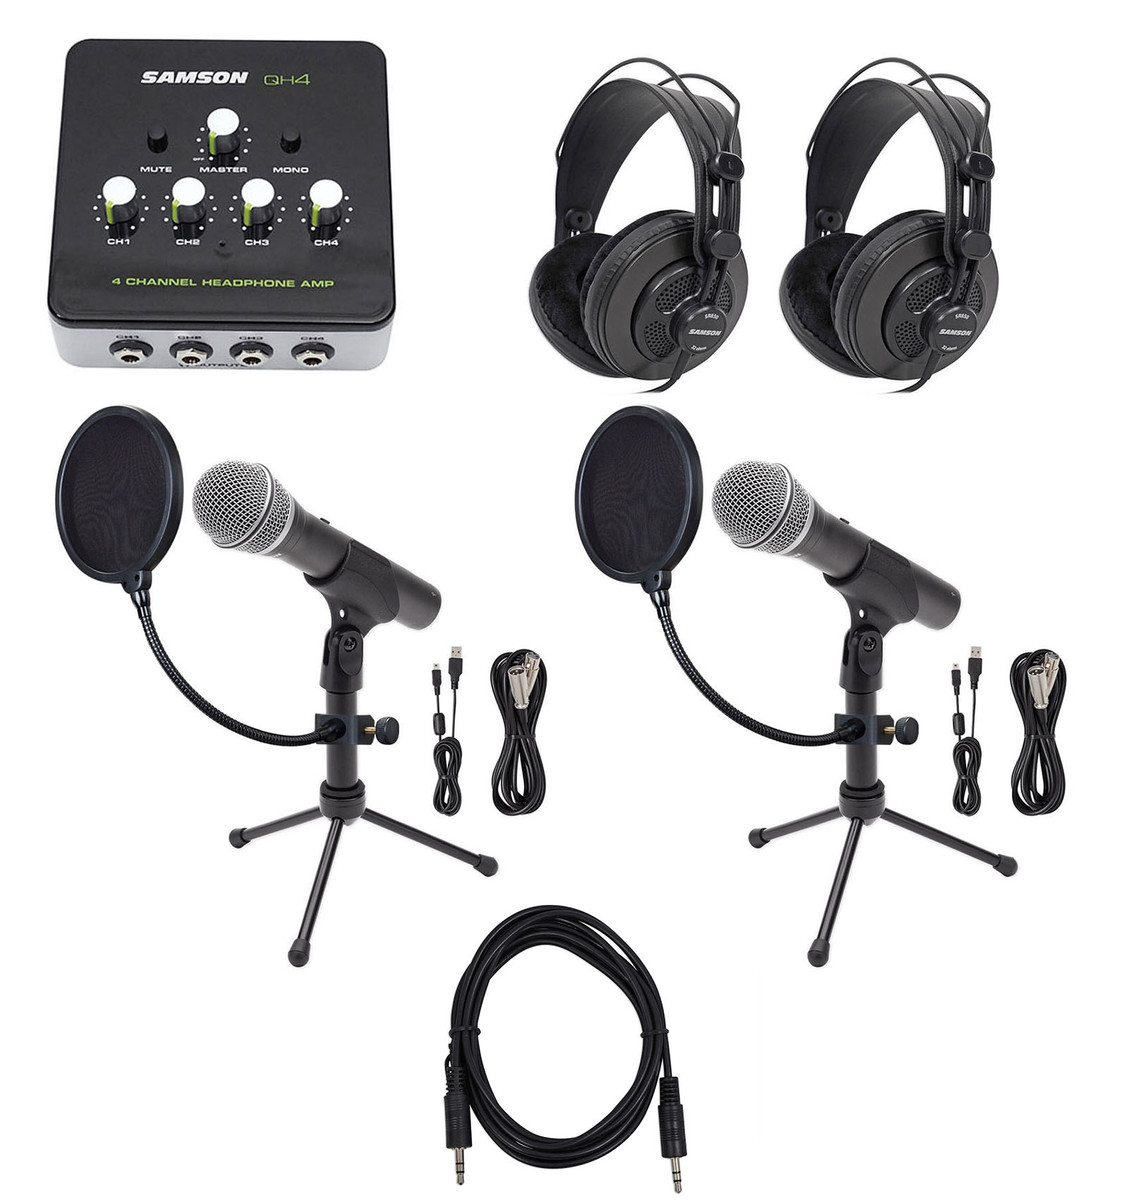 Podcasting Bundles in Microphones 